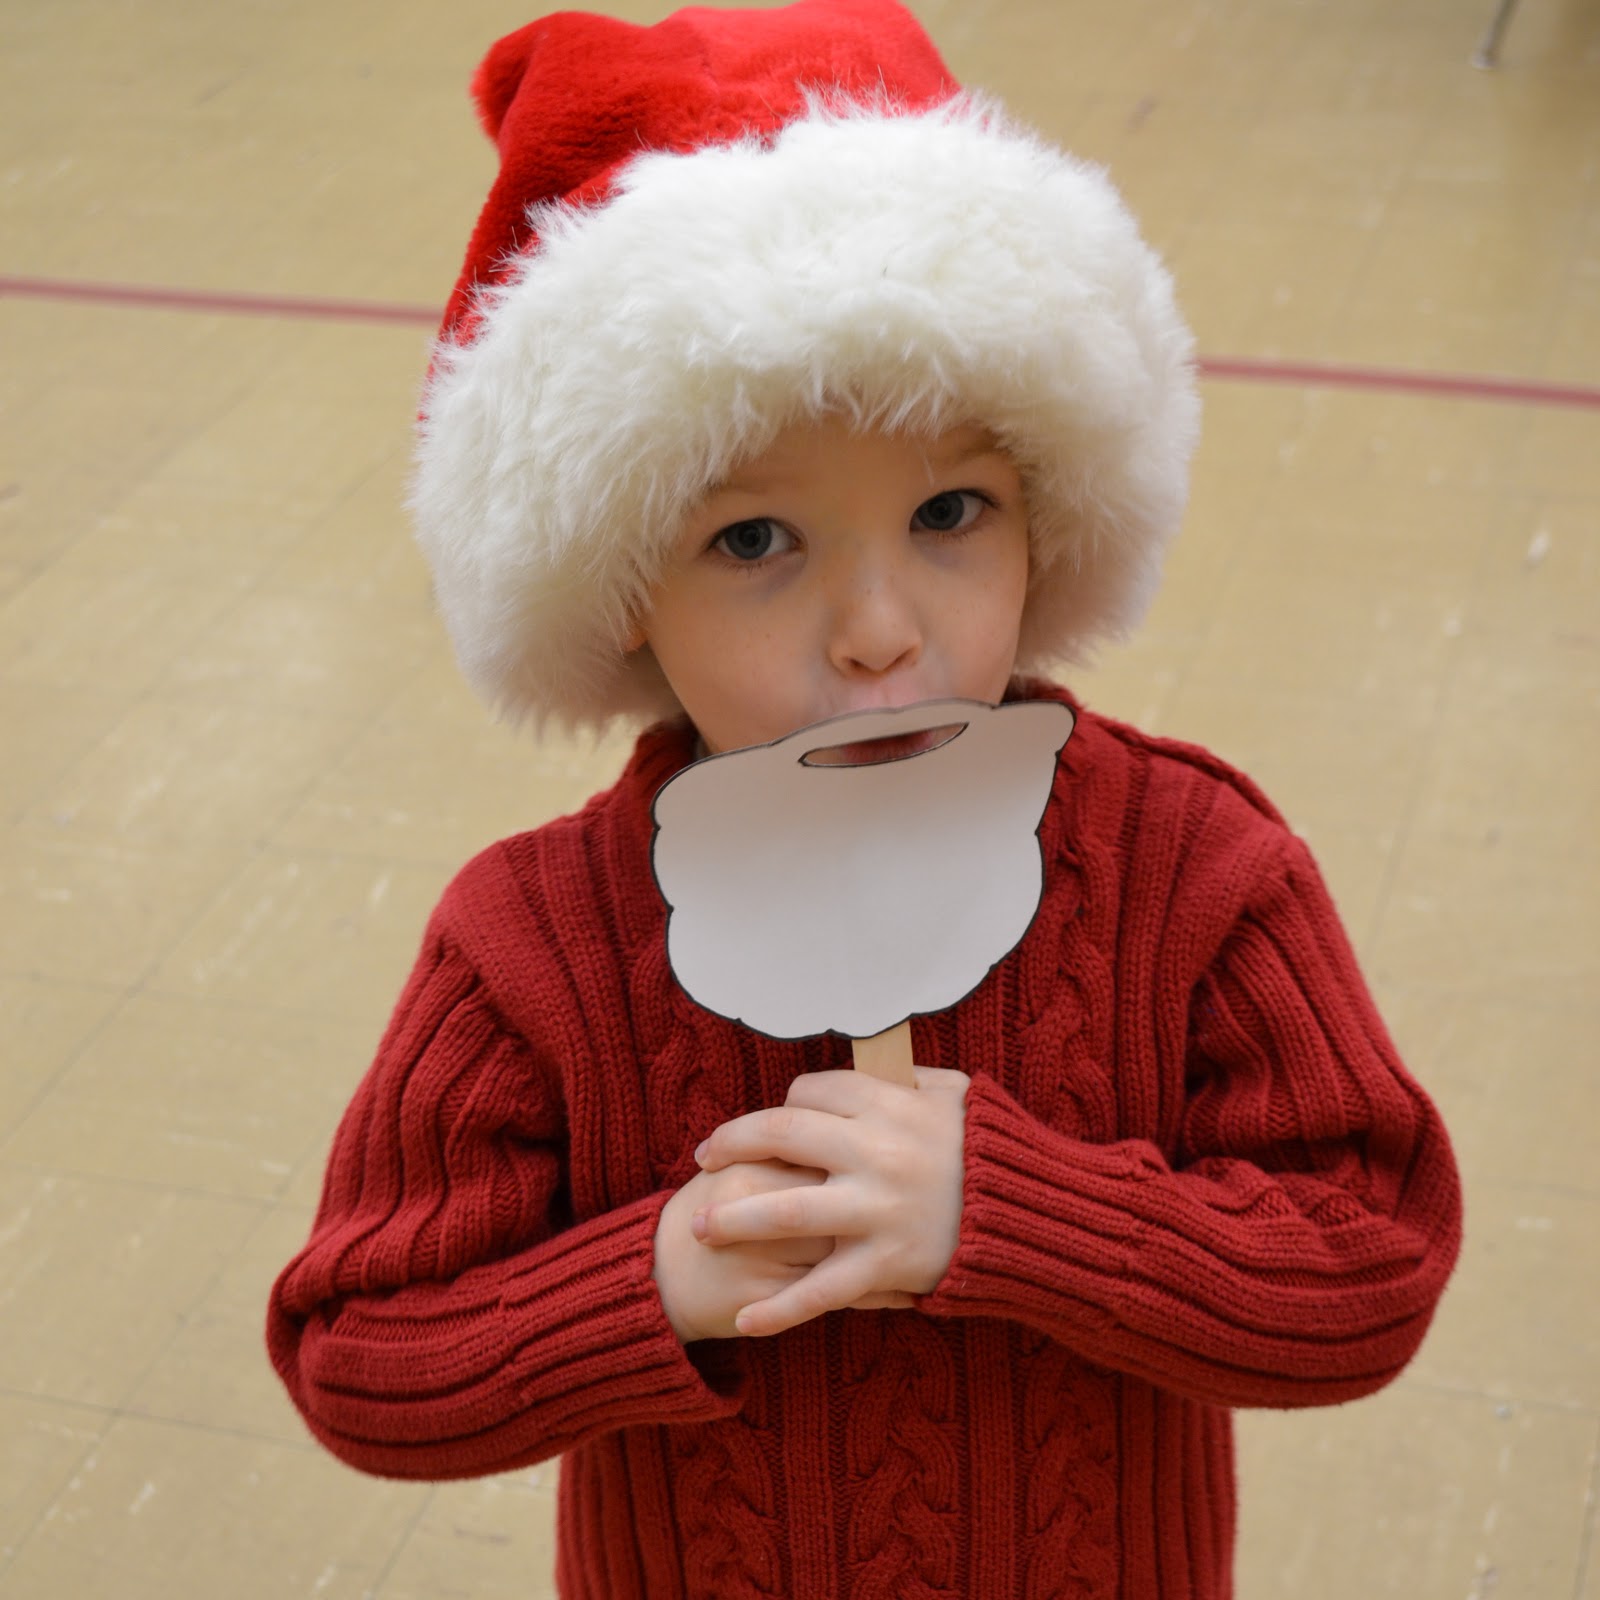 east-coast-mommy-letter-writing-to-santa-party-fundraiser